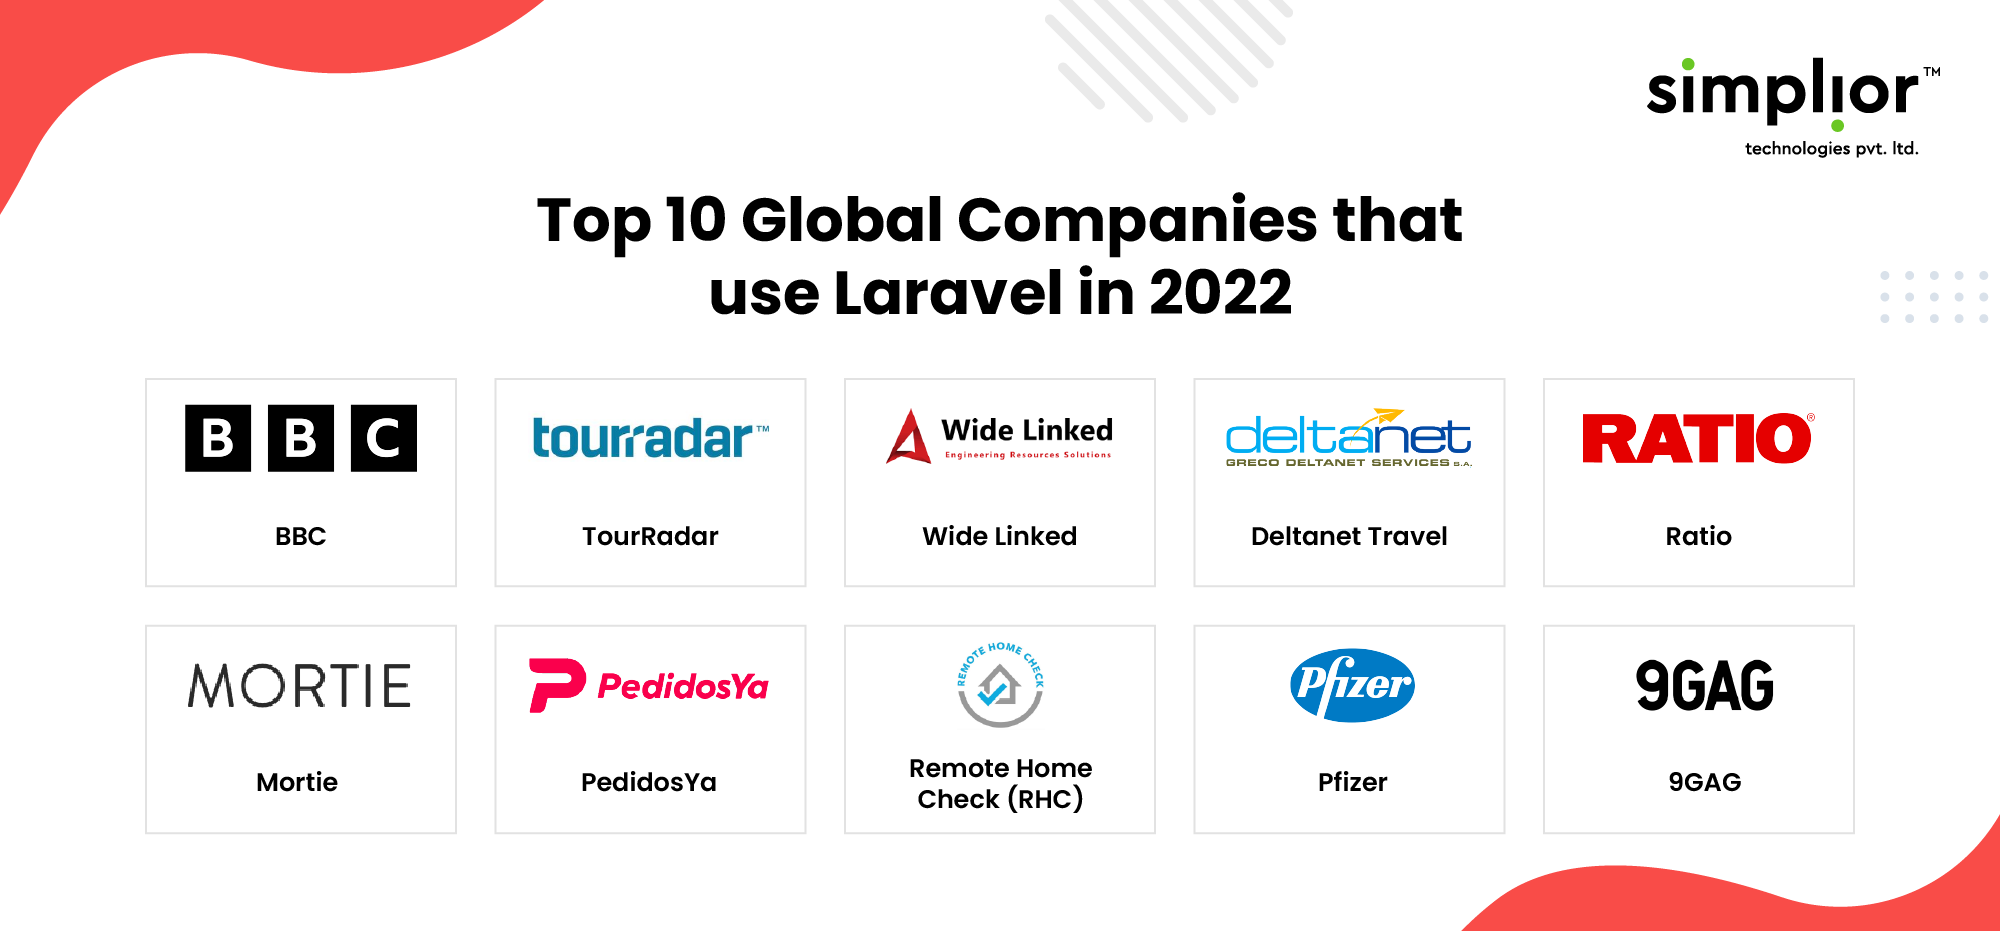 Top 10 Global Companies that use Laravel in 2022 - Simplior